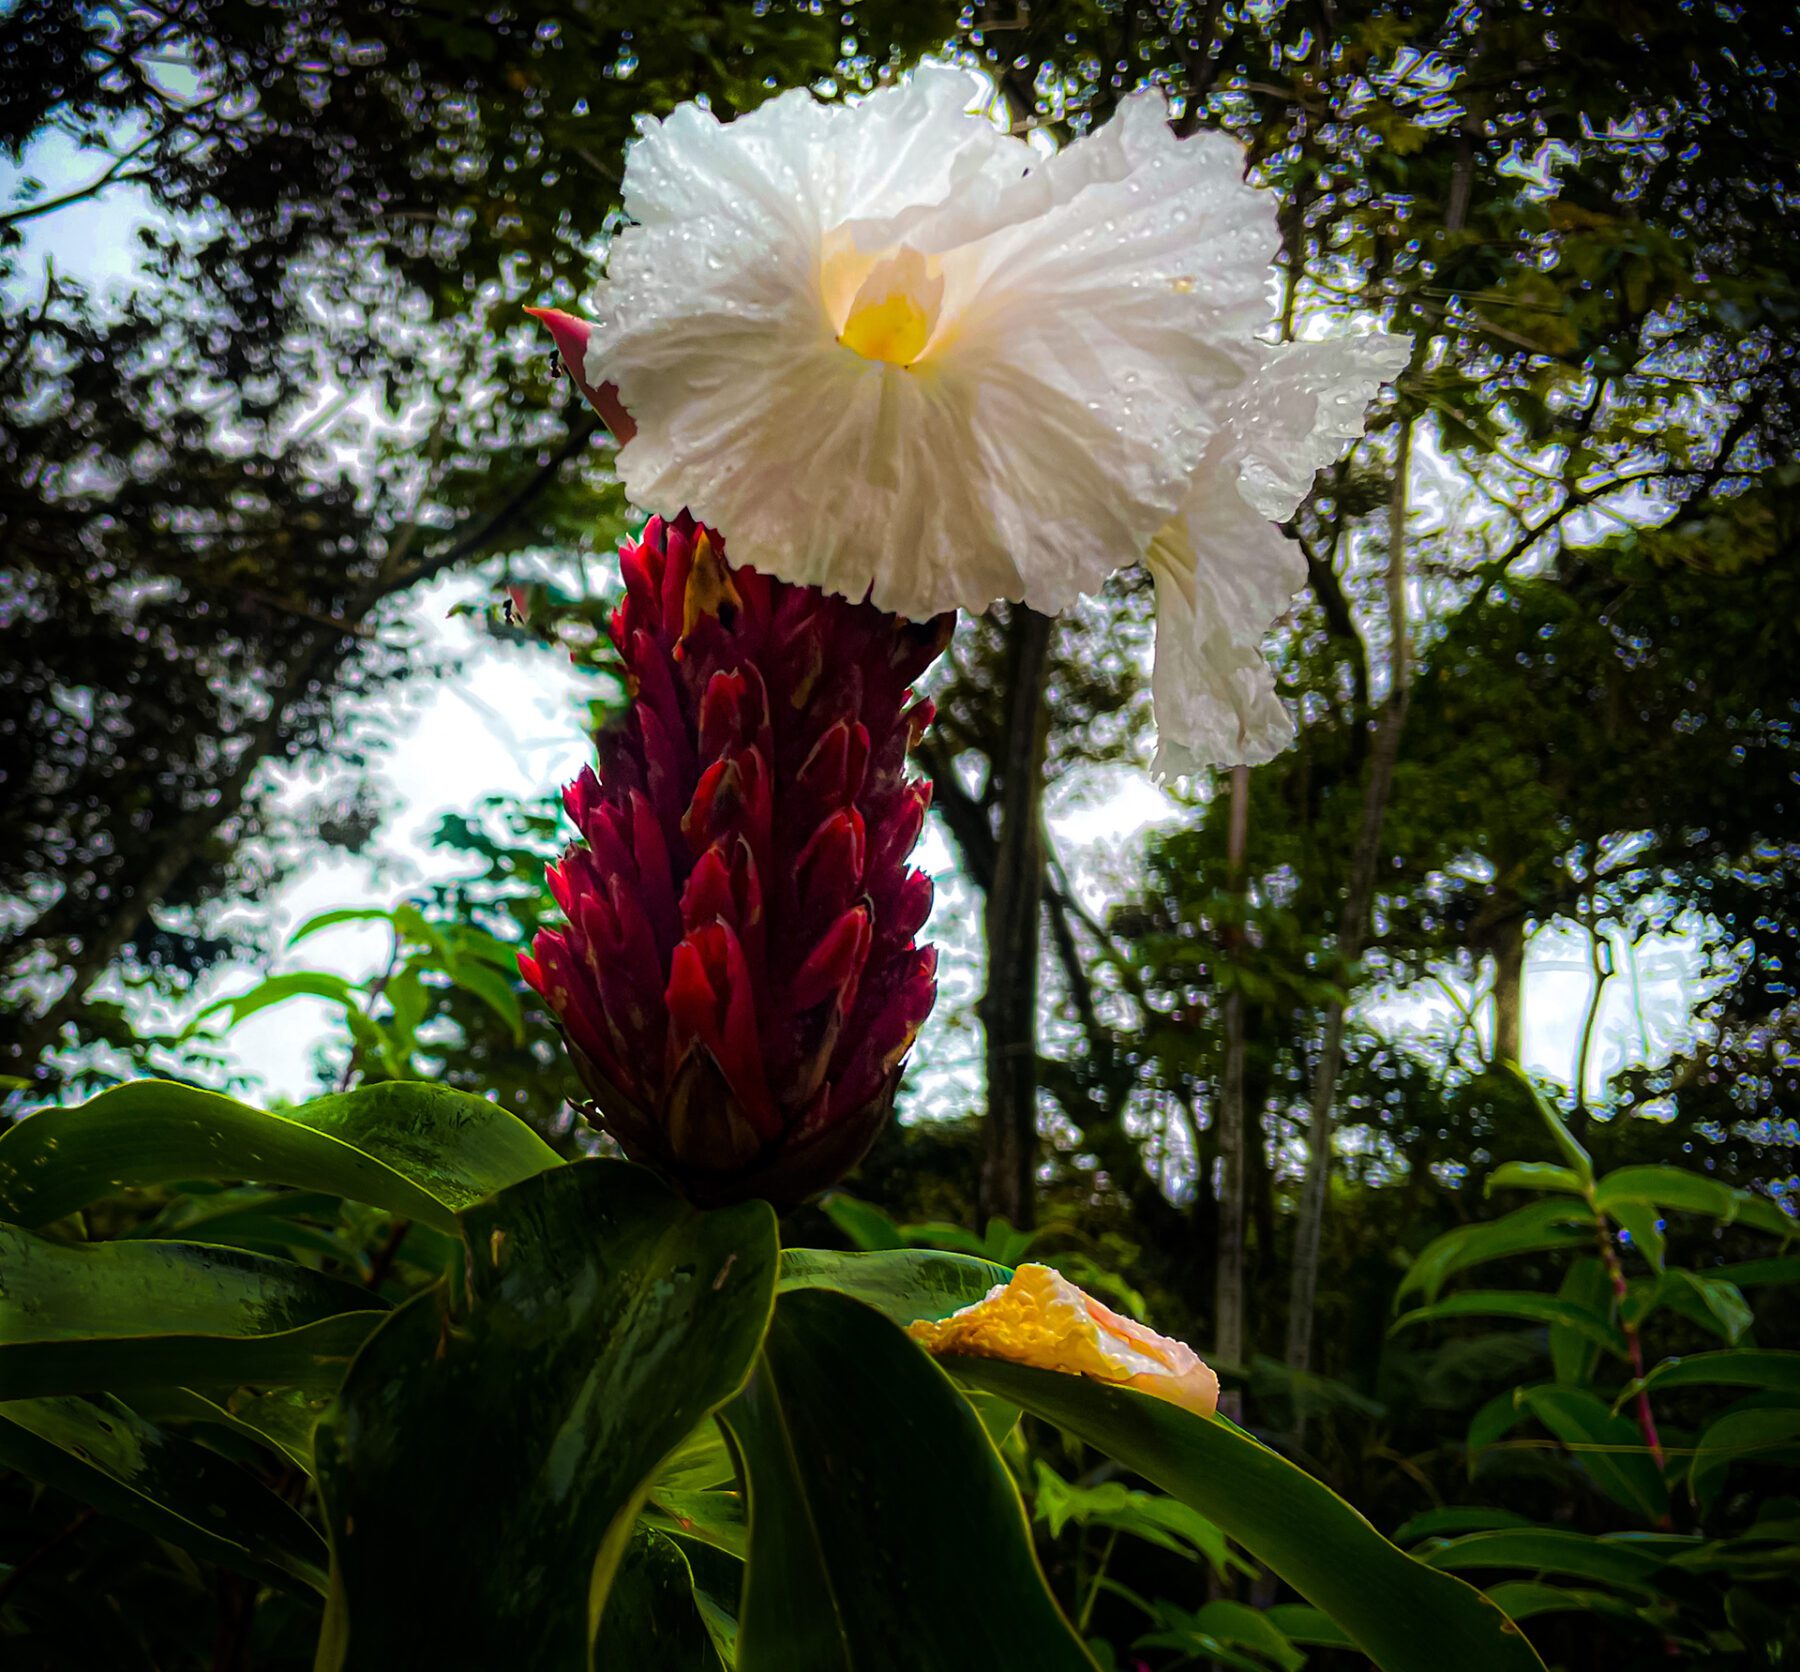 A Hellenic specious - Costa Rica flower in the middle of a forest.